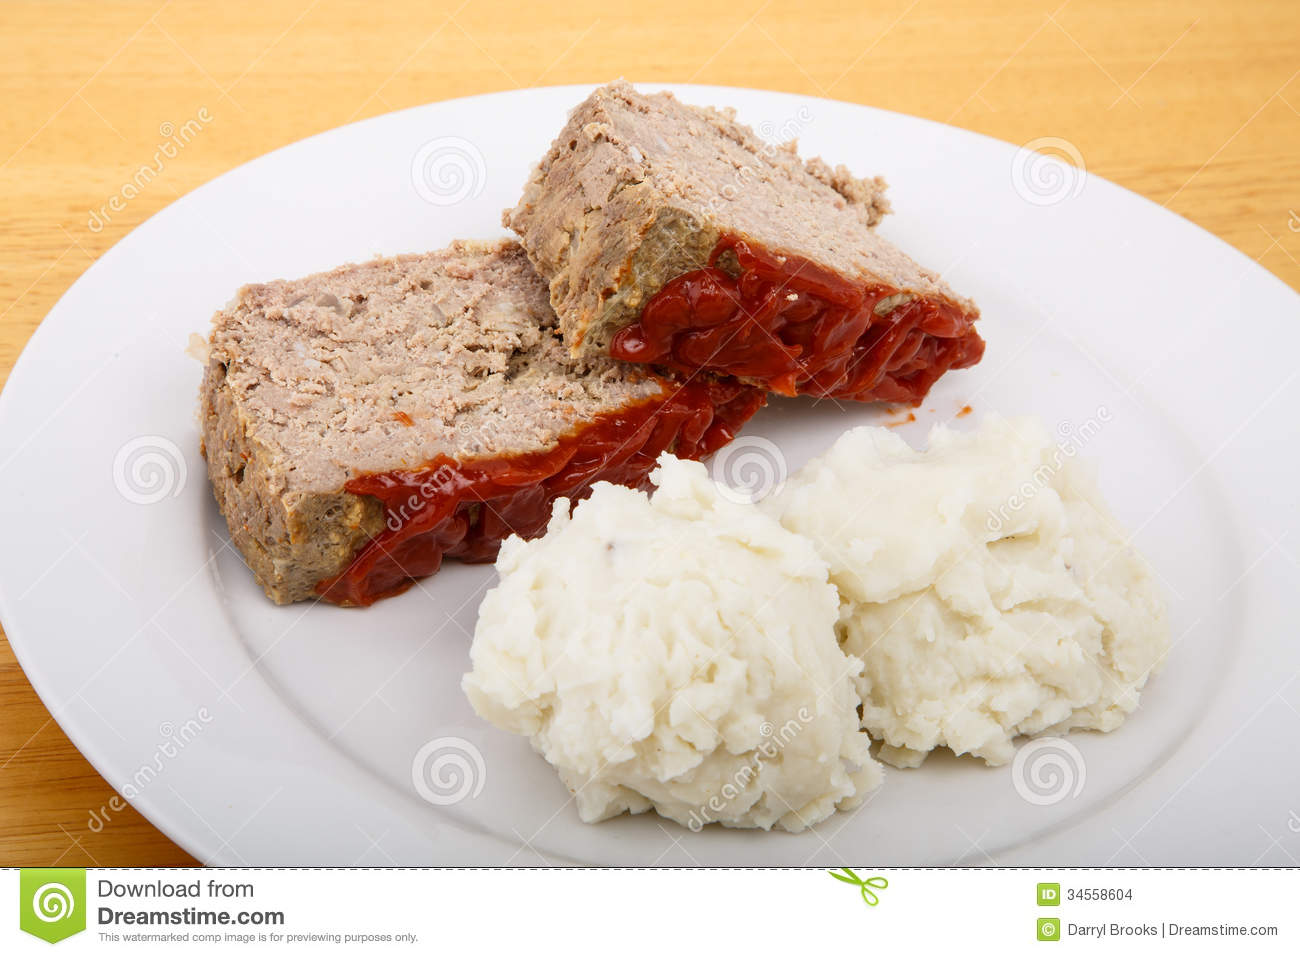 Serving Of Meatloaf And Mashed Potatoes On A White Plate